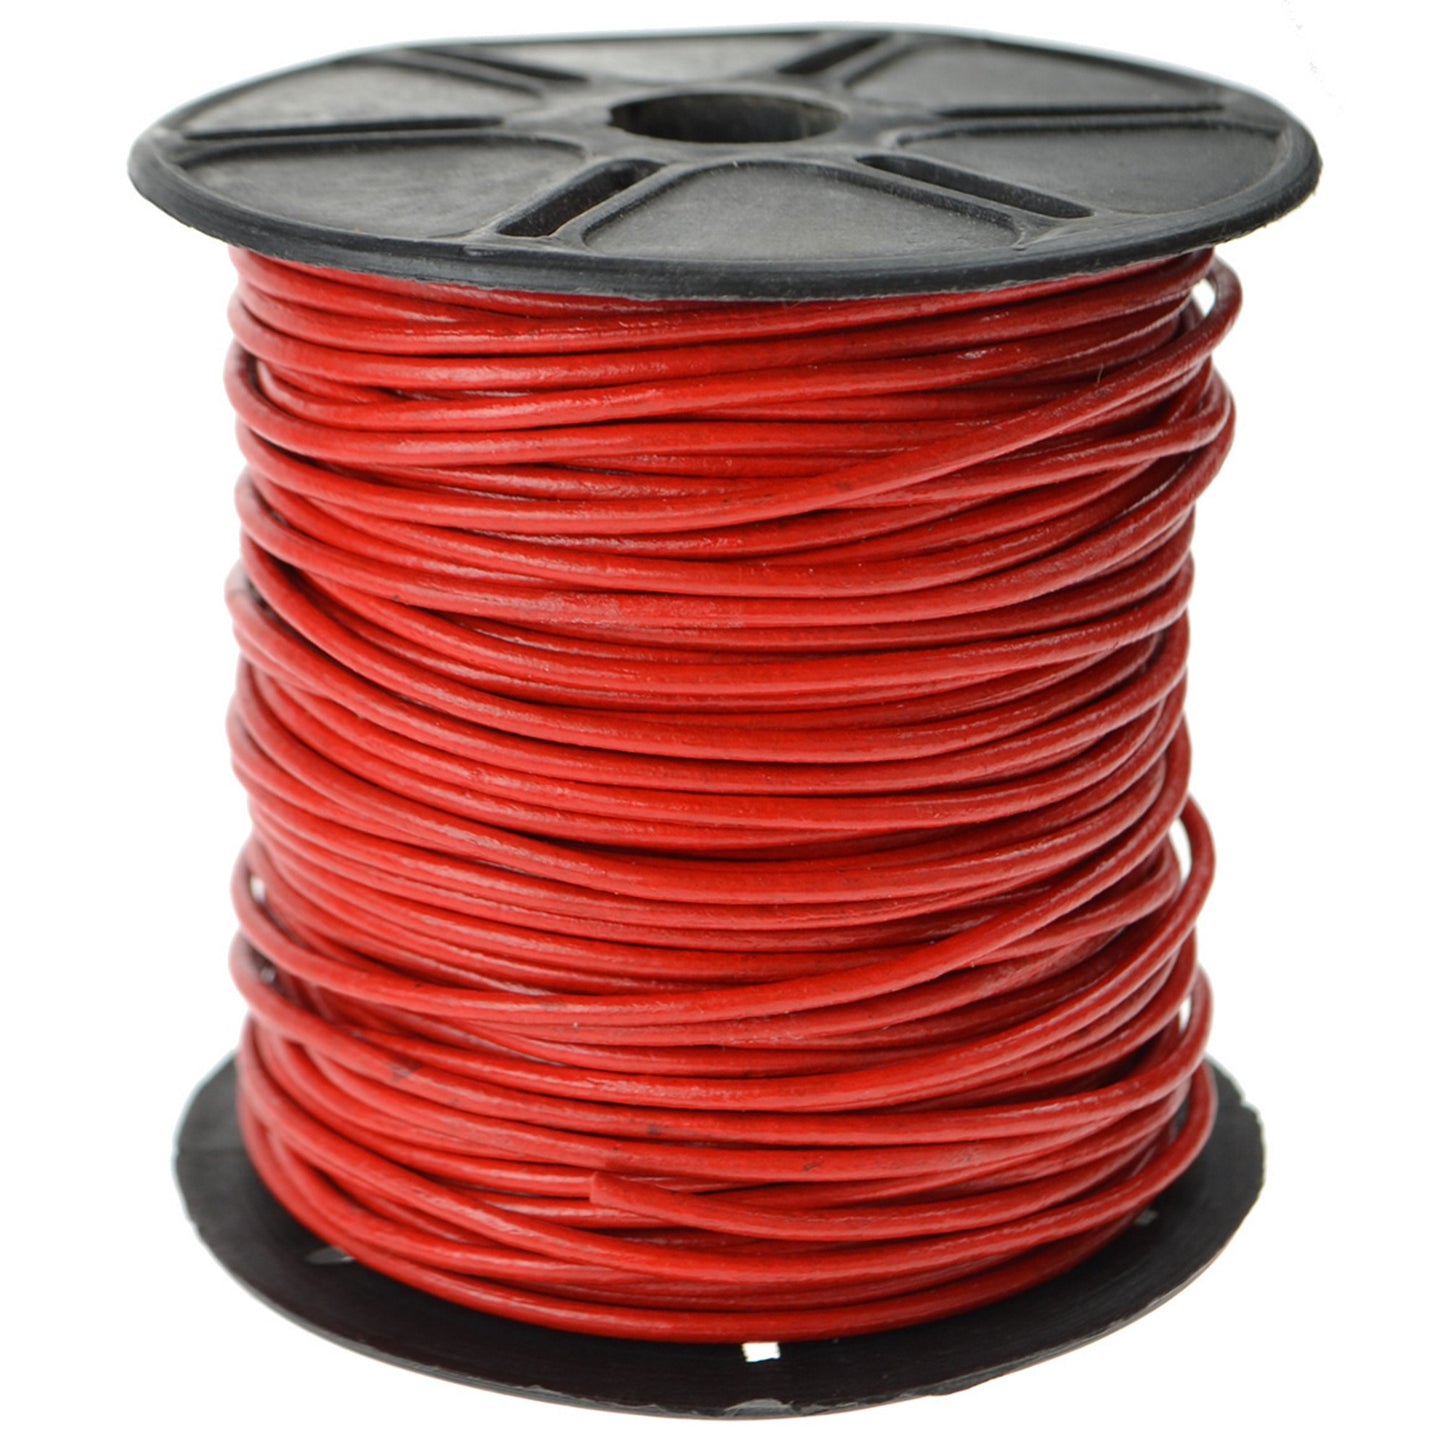 Thin Round Leather Shoe Laces - Red 2mm